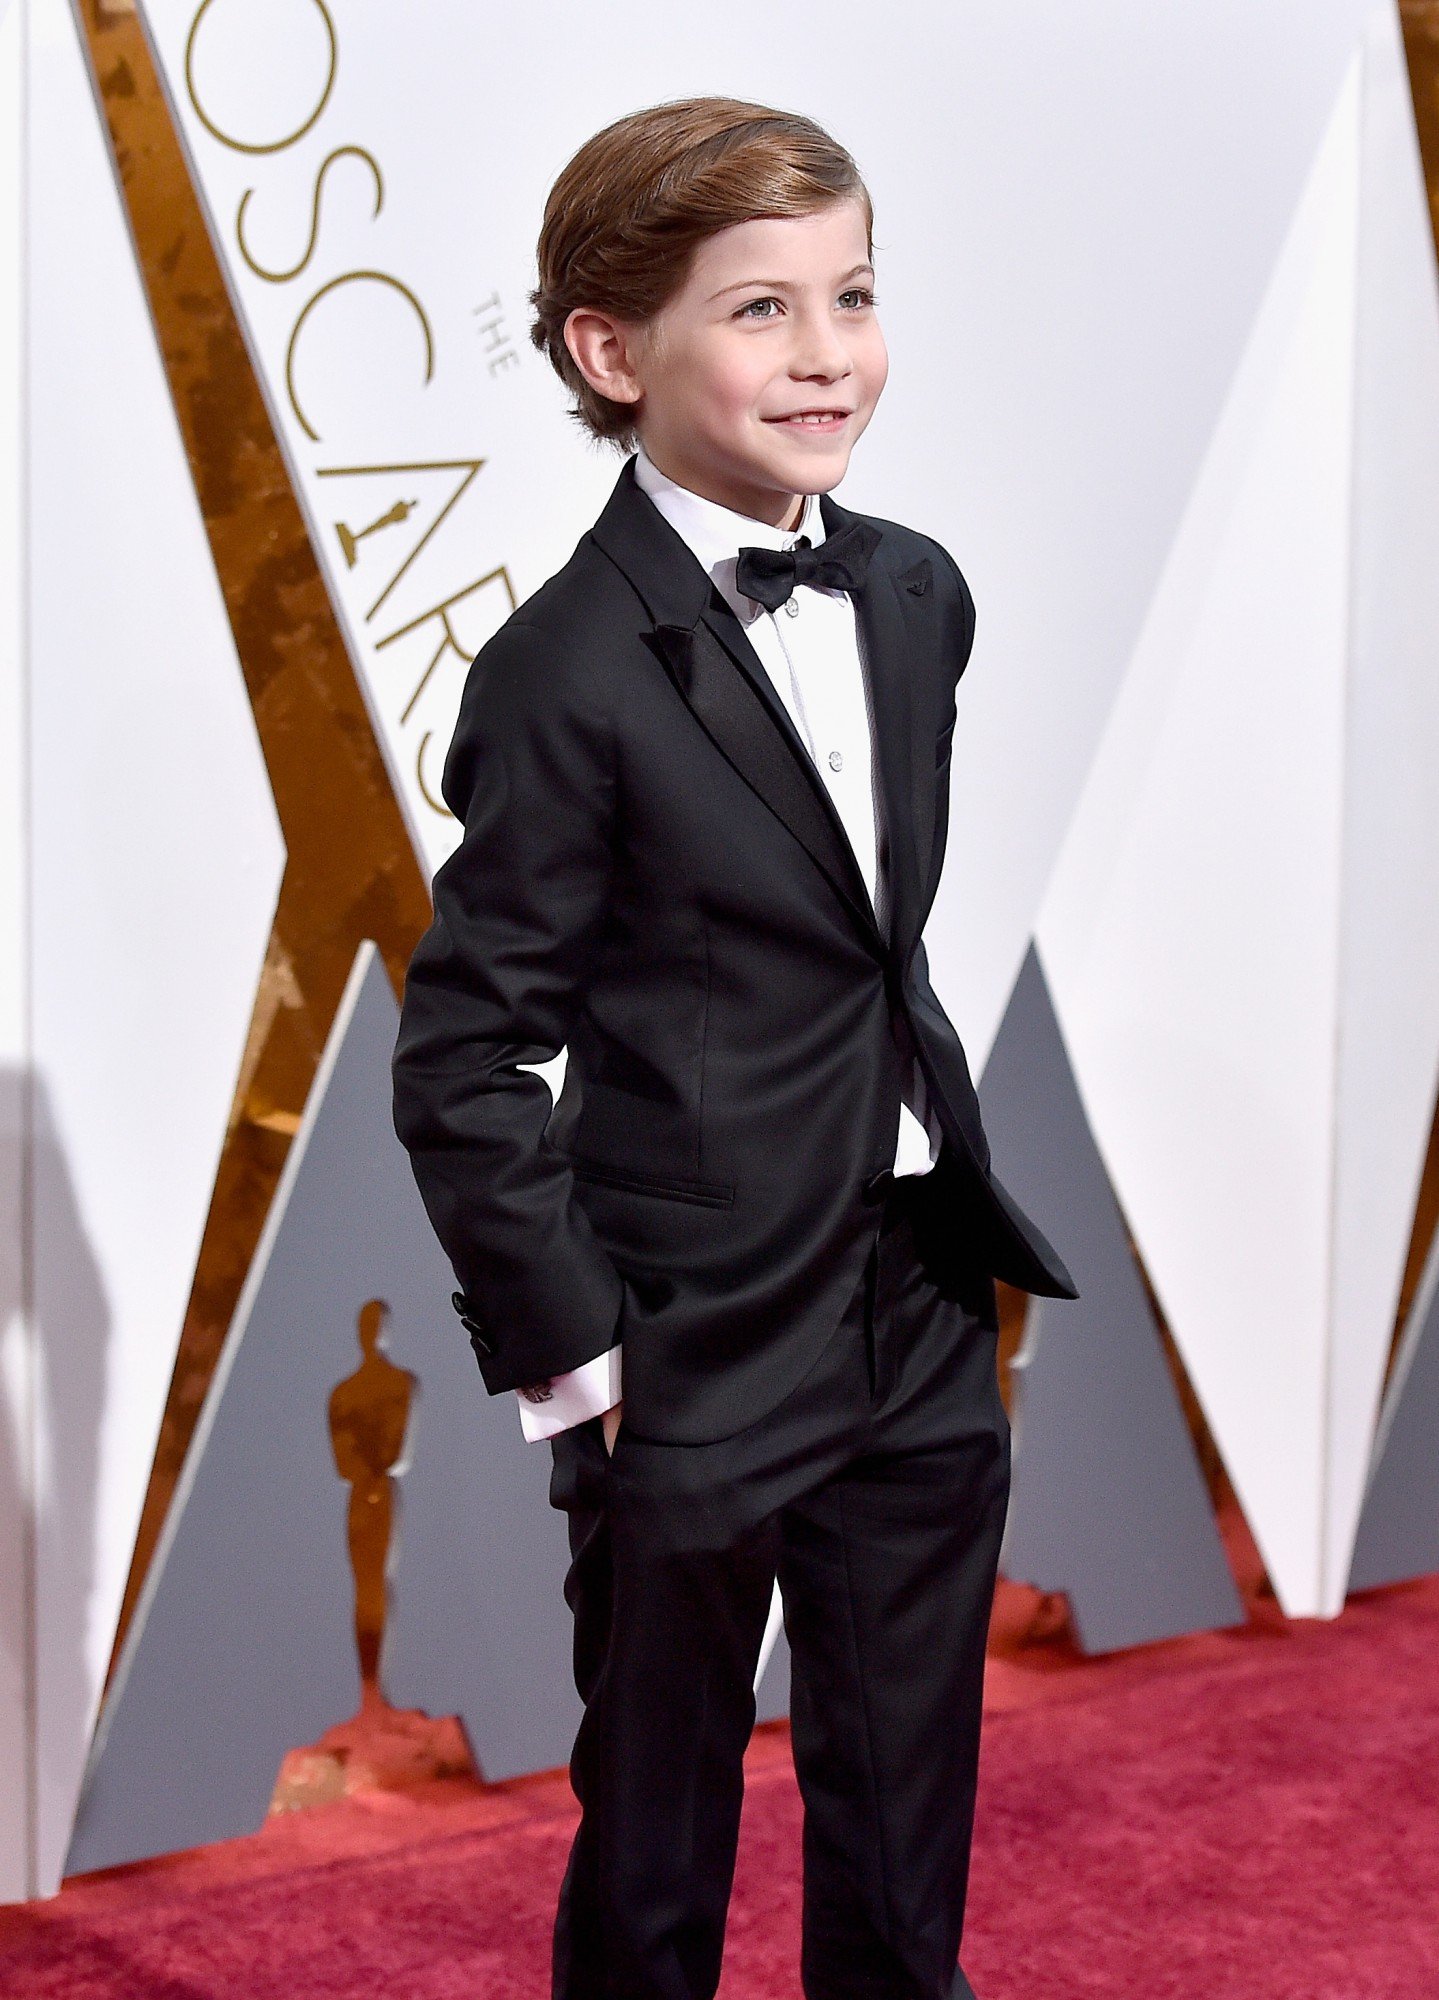 HOLLYWOOD, CA - FEBRUARY 28: Actor Jacob Tremblay attends the 88th Annual Academy Awards at Hollywood & Highland Center on February 28, 2016 in Hollywood, California. (Photo by Kevork Djansezian/Getty Images)